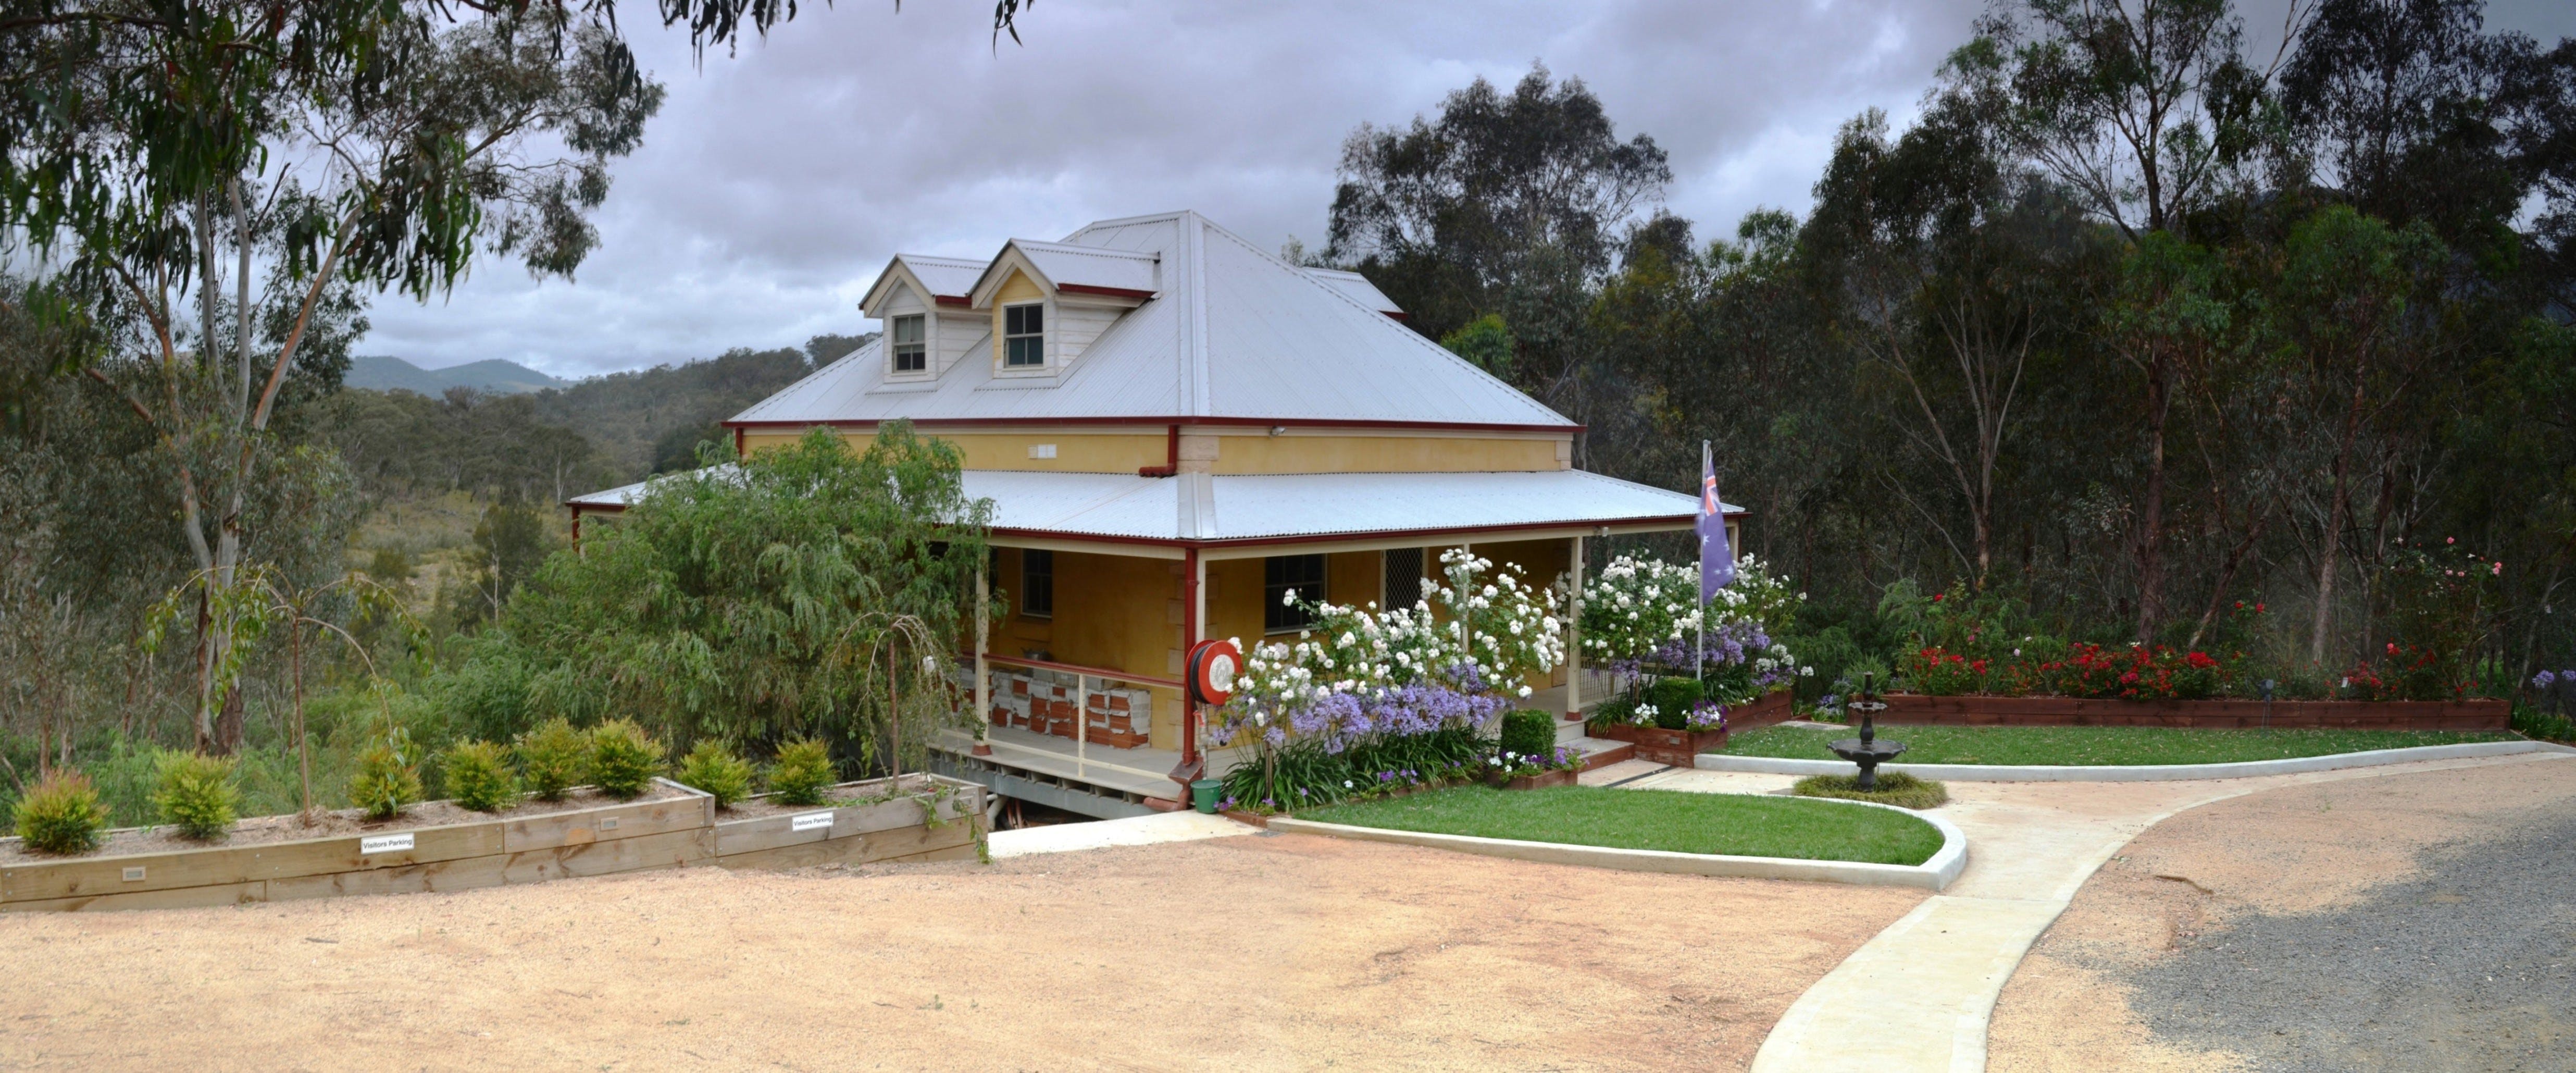 Tanwarra Lodge Bed and Breakfast - Accommodation Cooktown